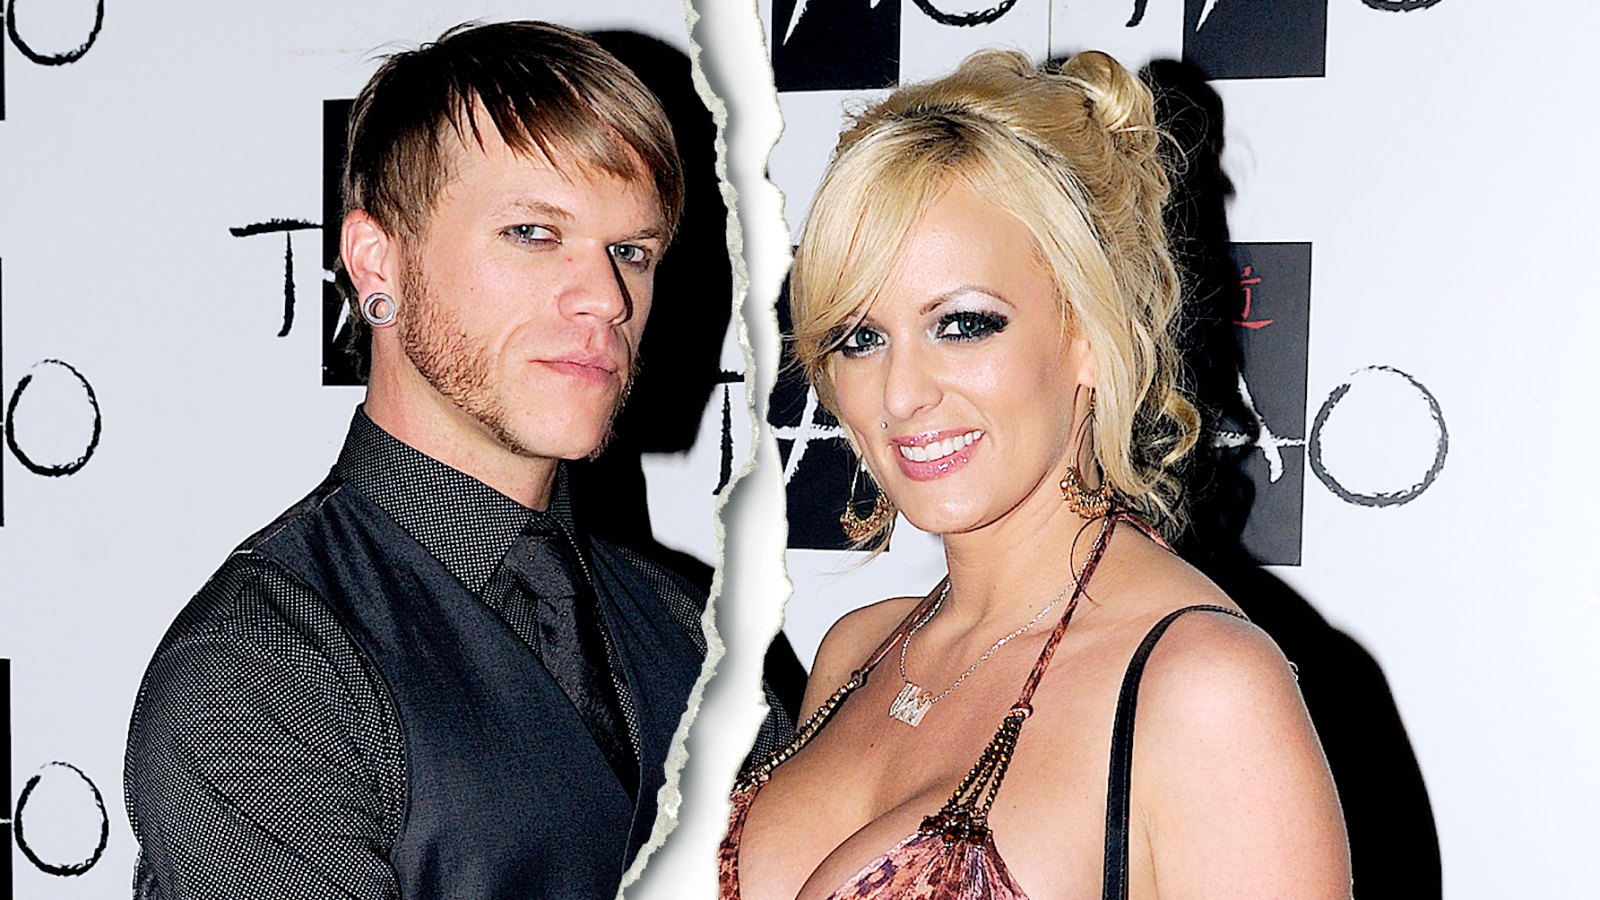 Xxx Com From Priyanka And His Hasban - Stormy Daniels' Husband Files for Divorce, Restraining Order